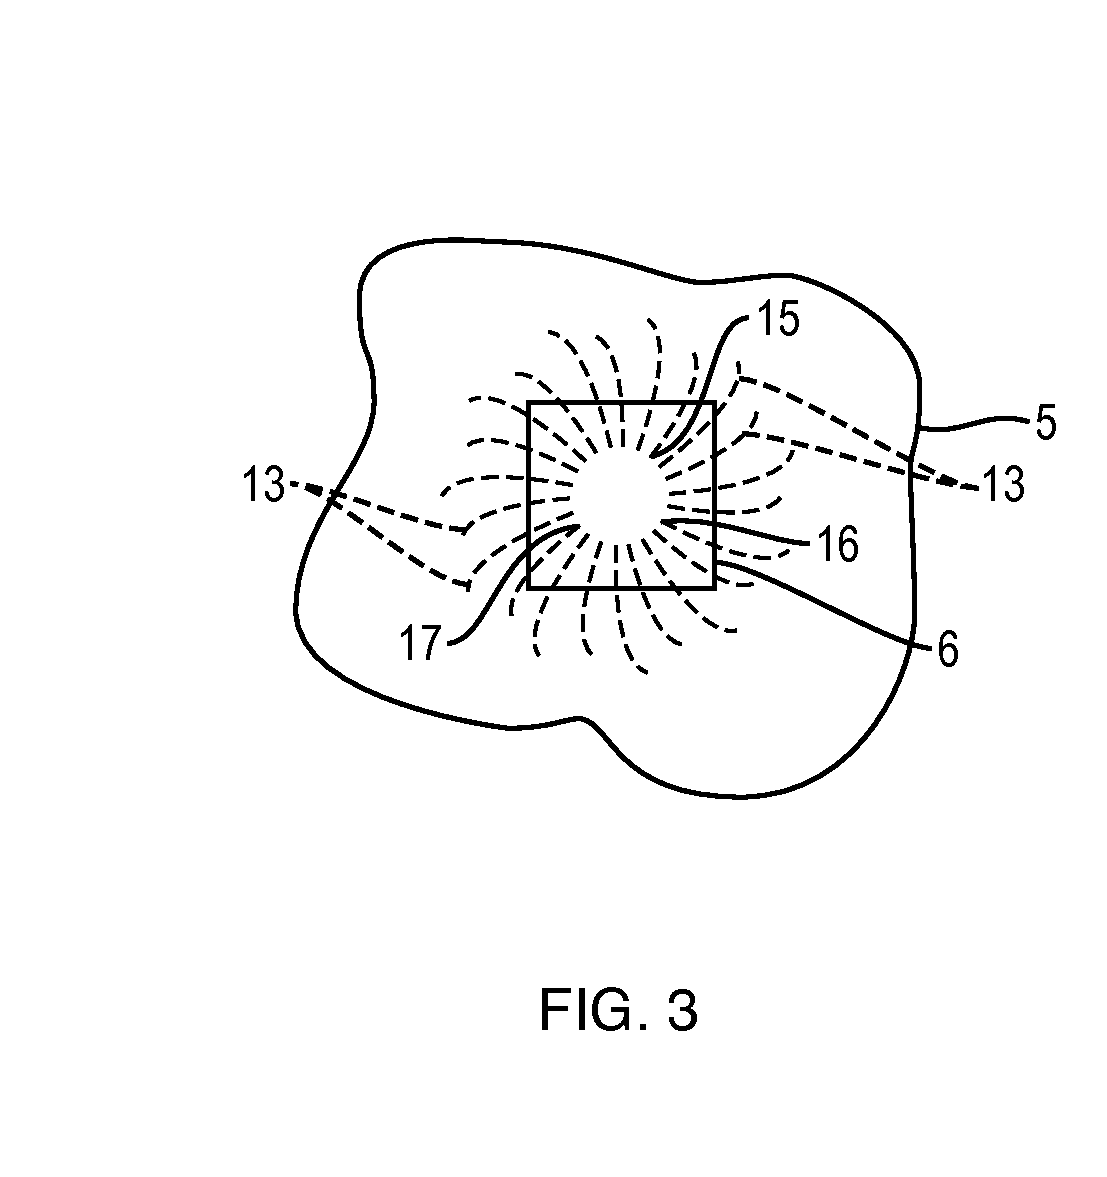 Apparatus and Method for Controlled Fluid Cooling During Laser Based Dental Treatments